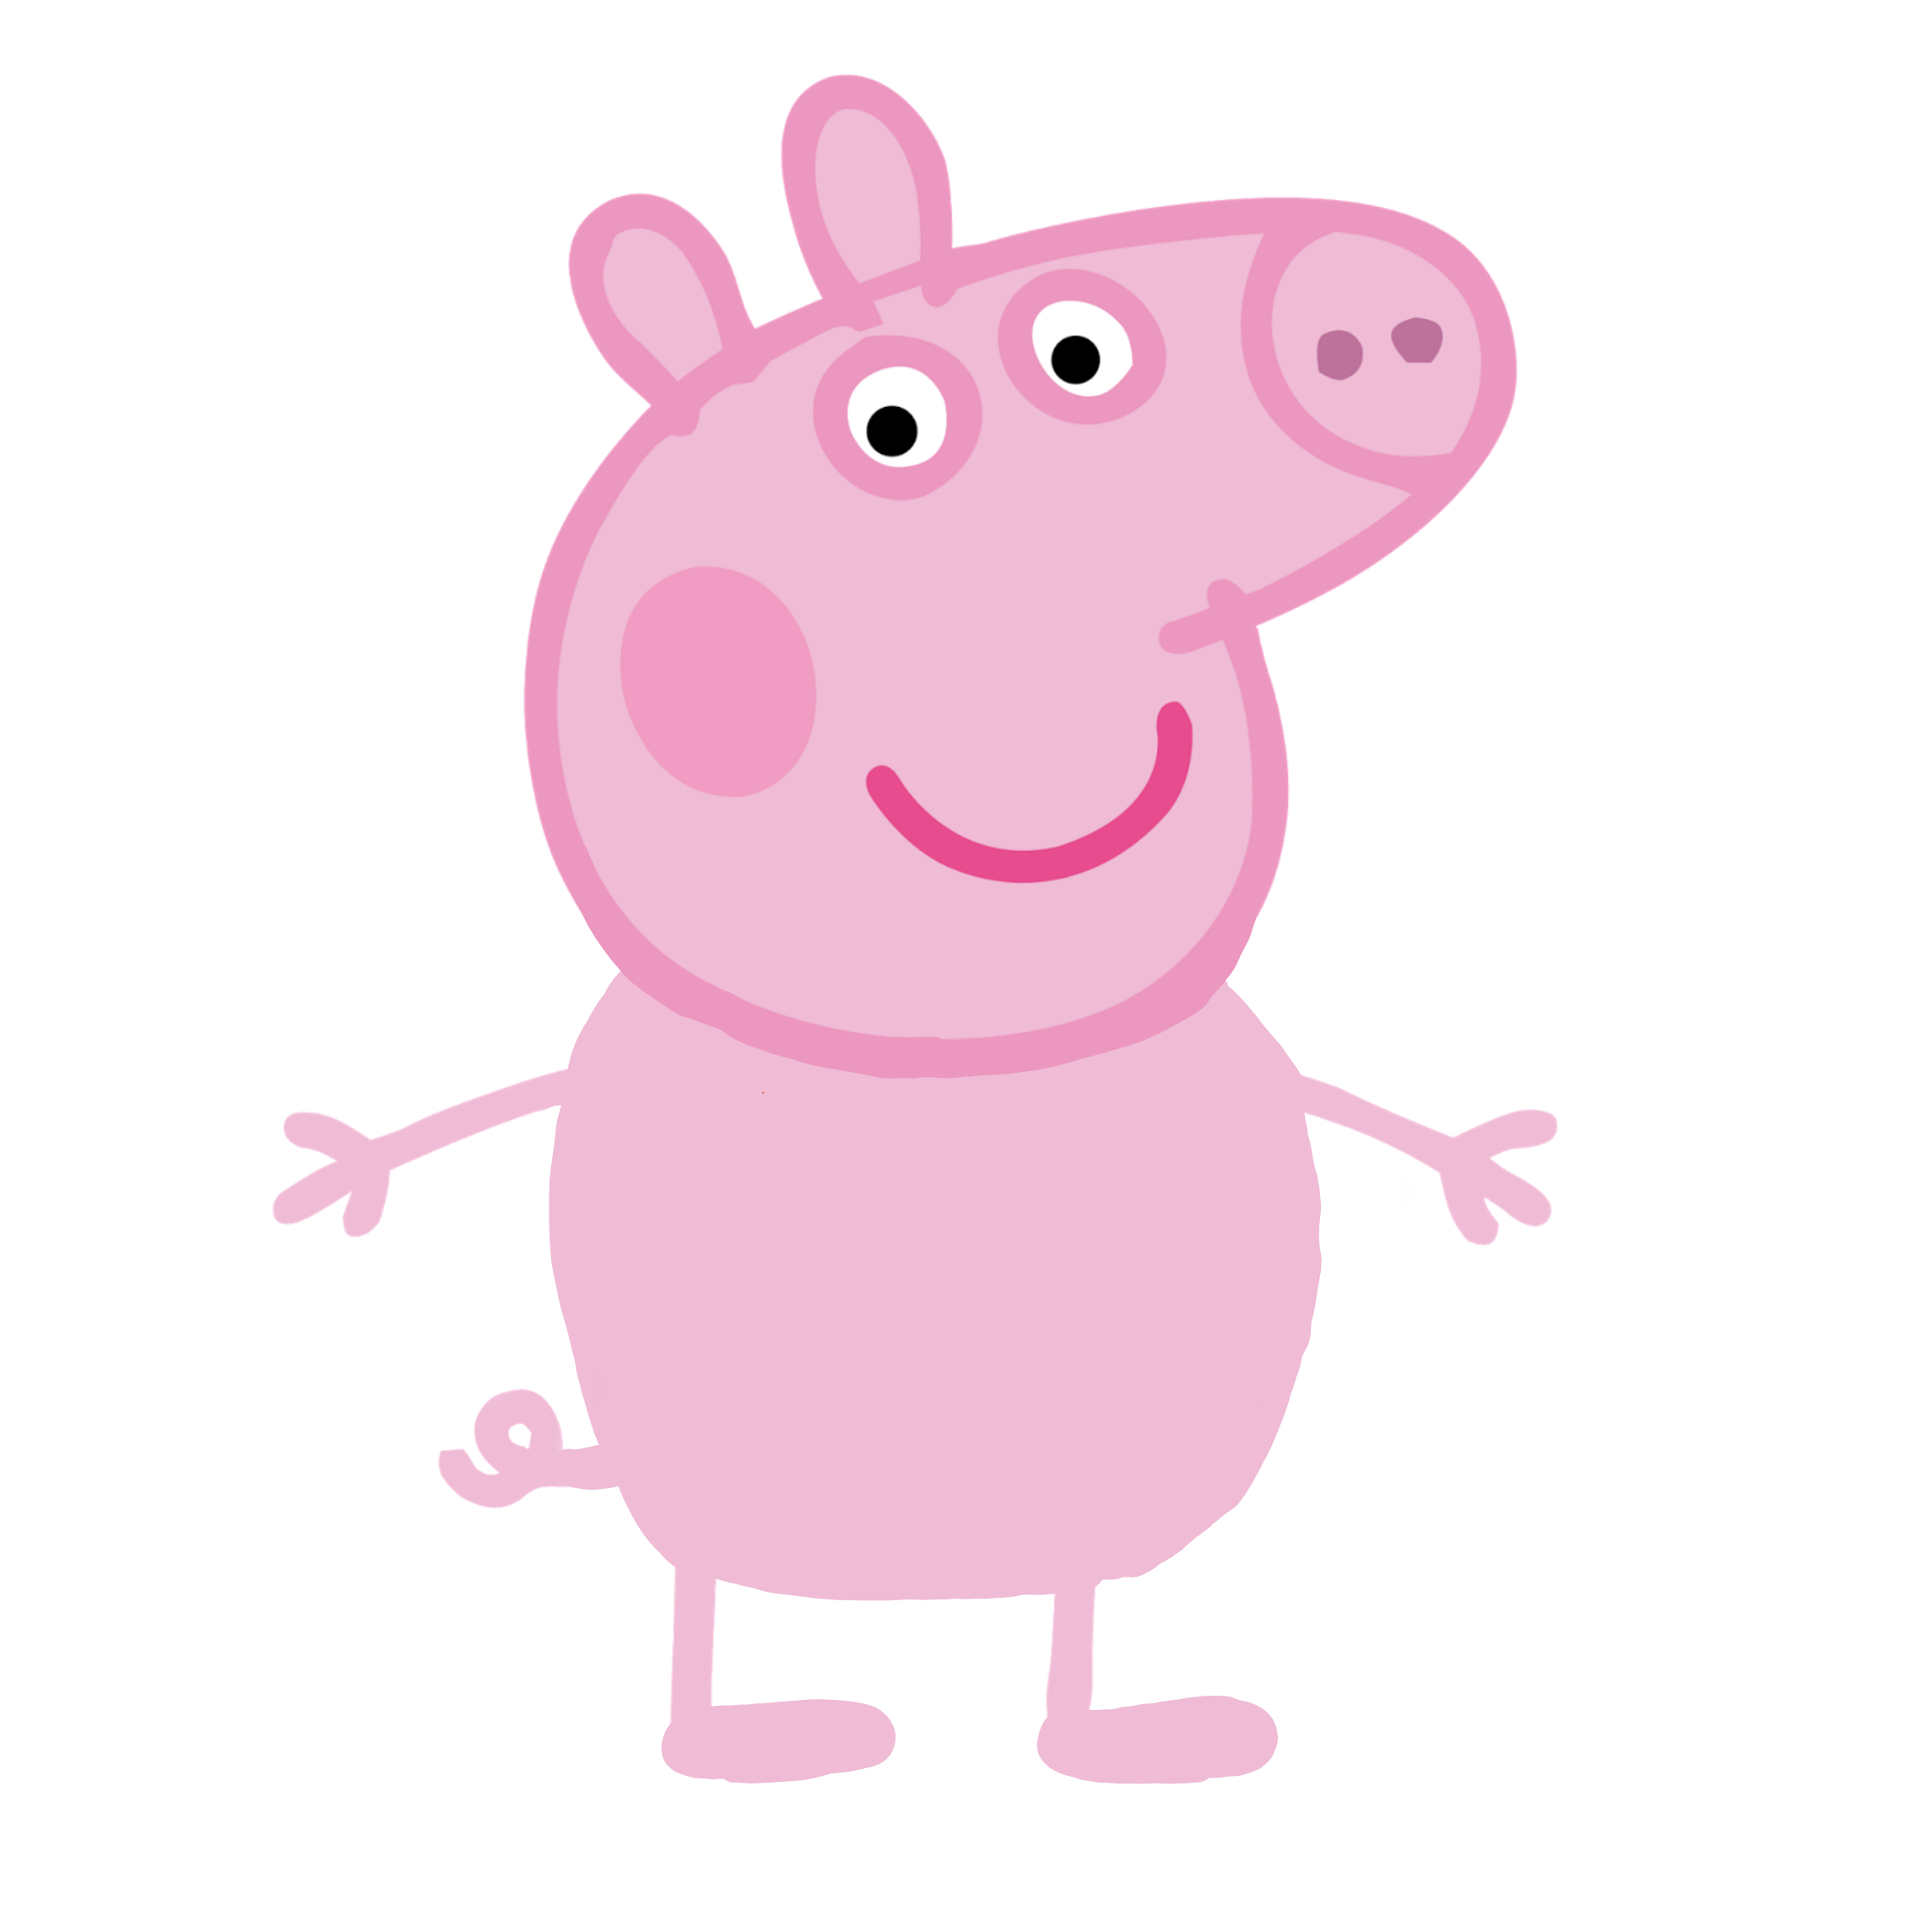 Funny Pfp Peppa Pig Peppa S Tenor Instagram Profile Picture Images ...